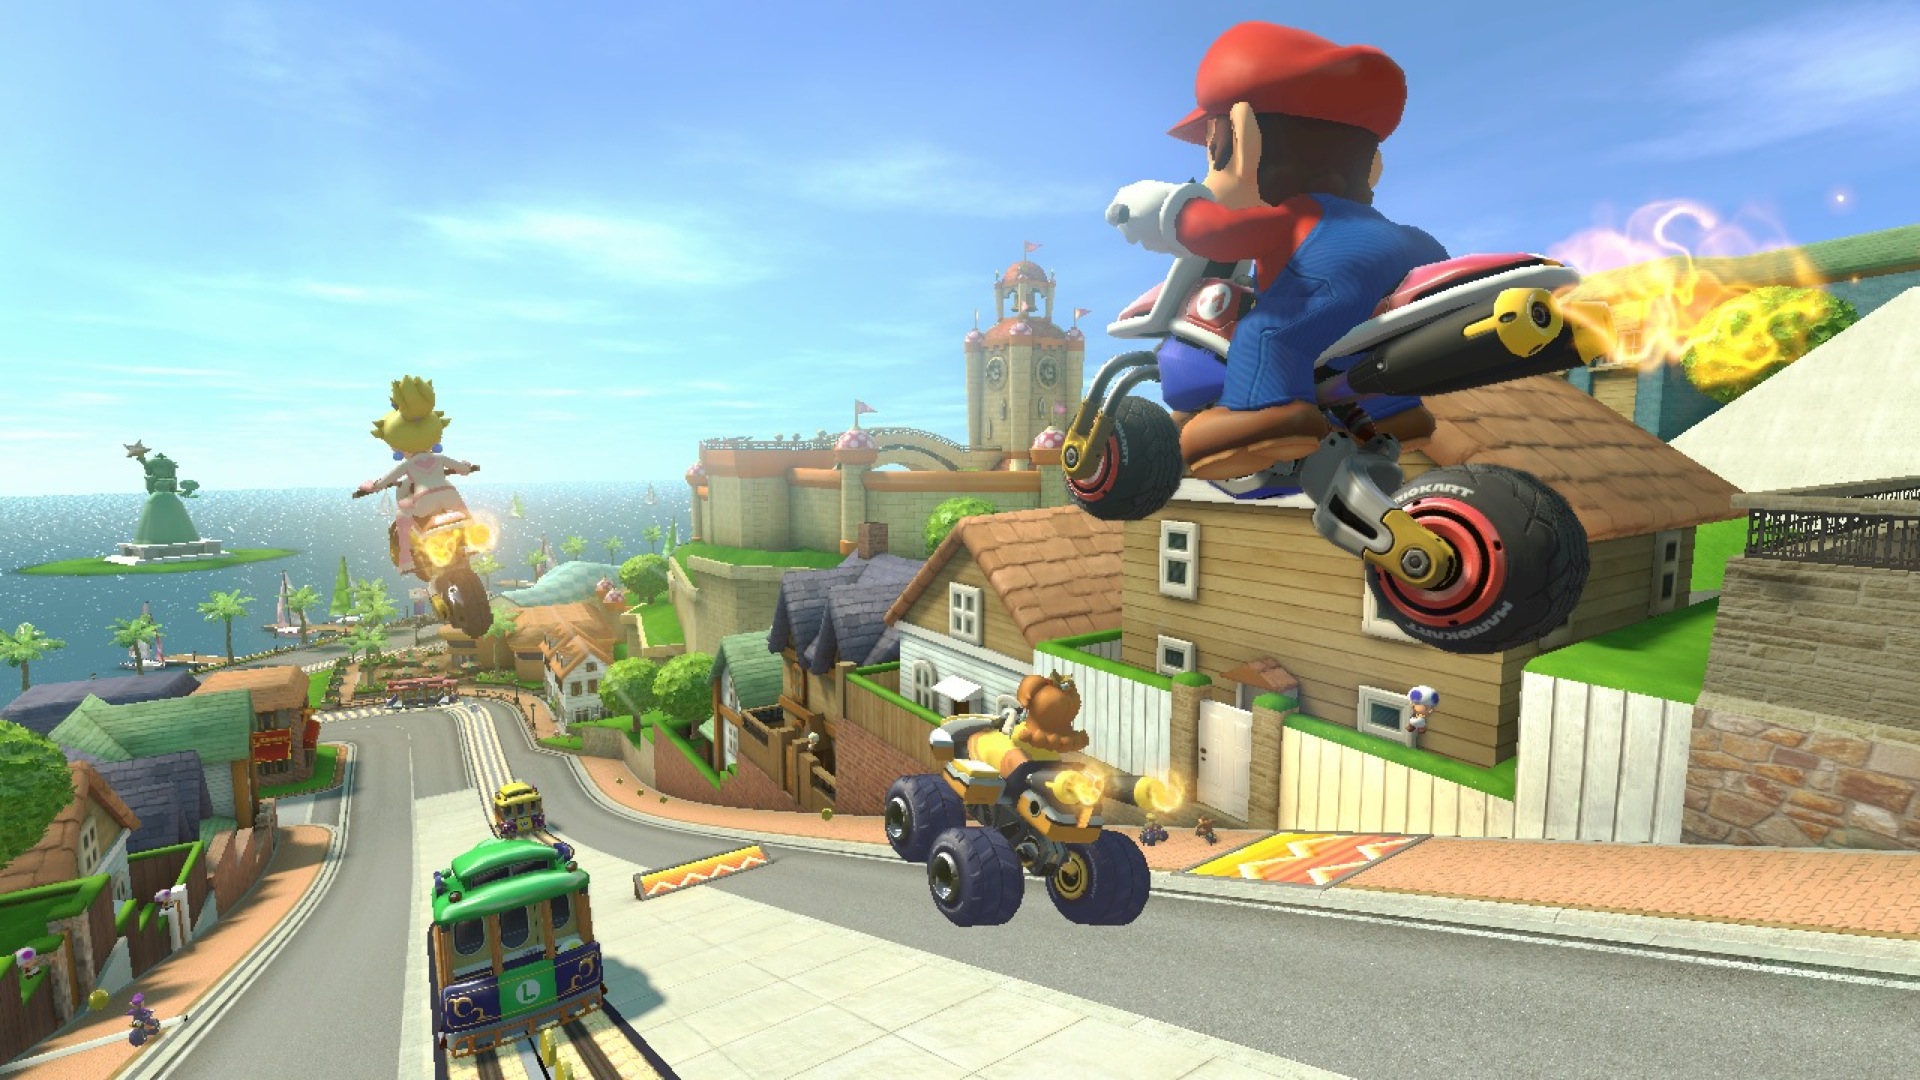 Prime Opvoeding Proficiat Don't expect Microsoft to release Mario Kart-style racing game for Xbox One  - GameSpot